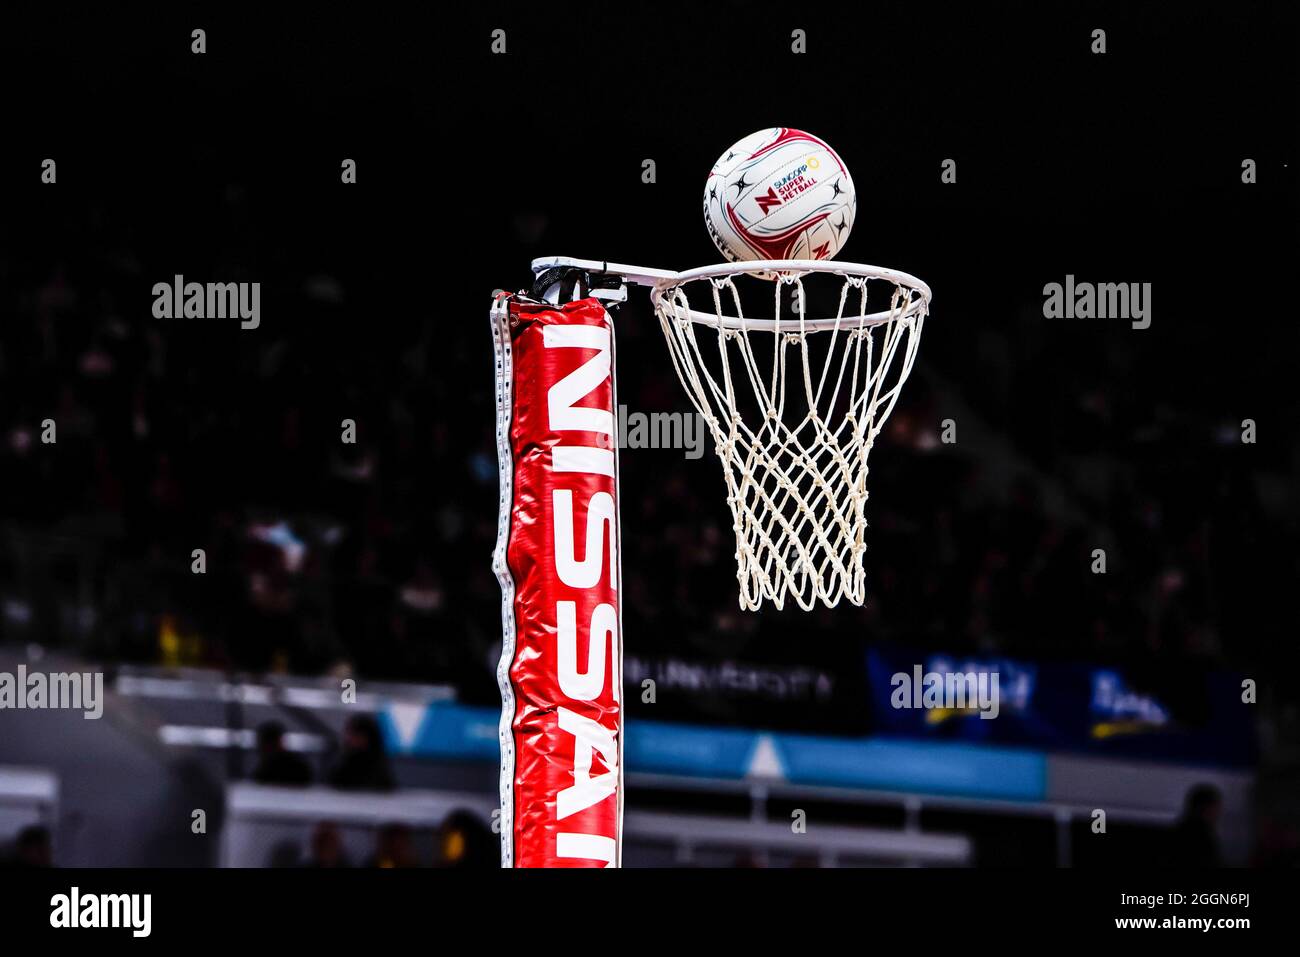 Melbourne, Australia. 15th Feb, 2015. The ball flying into the net, during the Suncorp Super Netball 2019 Season Game 1 between Melbourne Vixens and Queensland Firebirds at Melbourne Arena, Melbourne Olympic Park. Vixens won this home match with the score 73 - 61. (Photo by Alexander Bogatyrev/SOPA Image/Sipa USA) Credit: Sipa USA/Alamy Live News Stock Photo